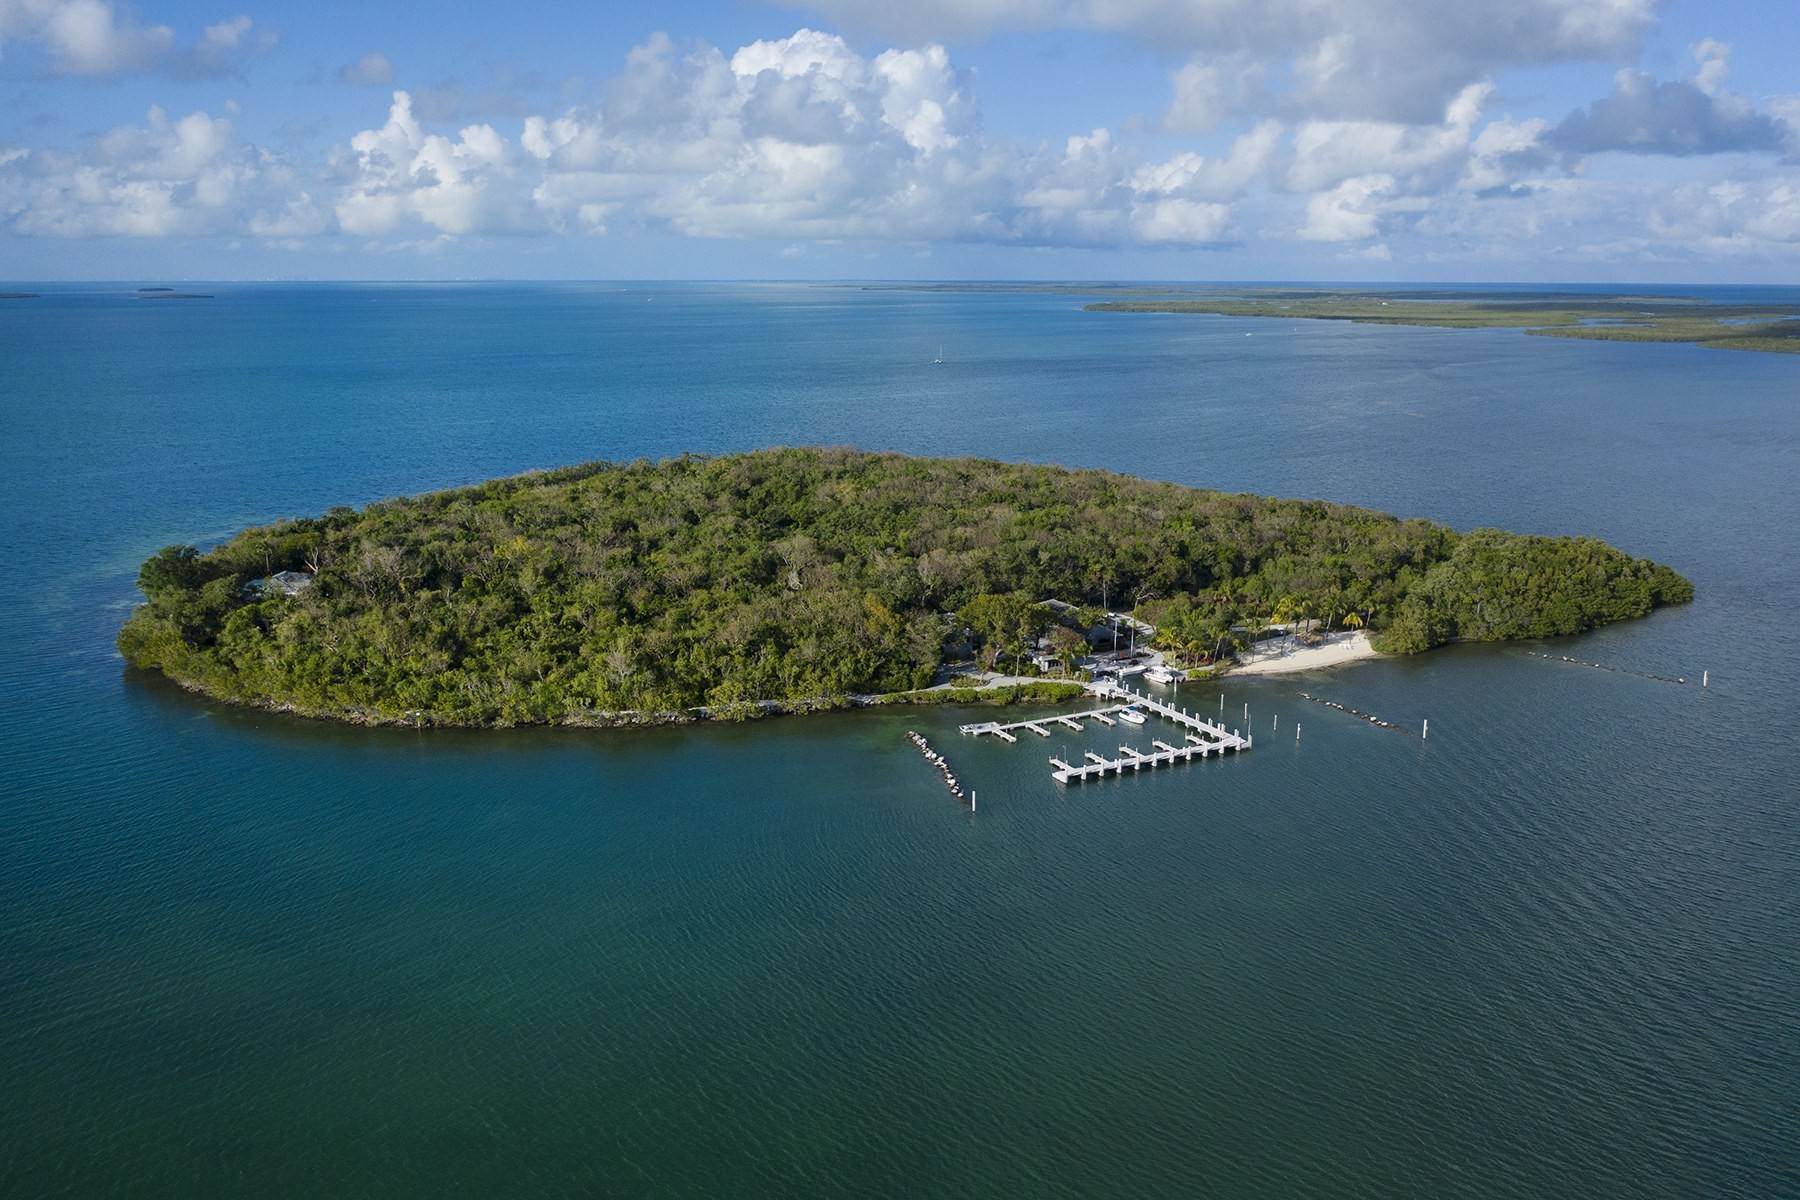 Property for Sale at Pumpkin Key 10 Cannon Point Key Largo, Florida 33037 United States